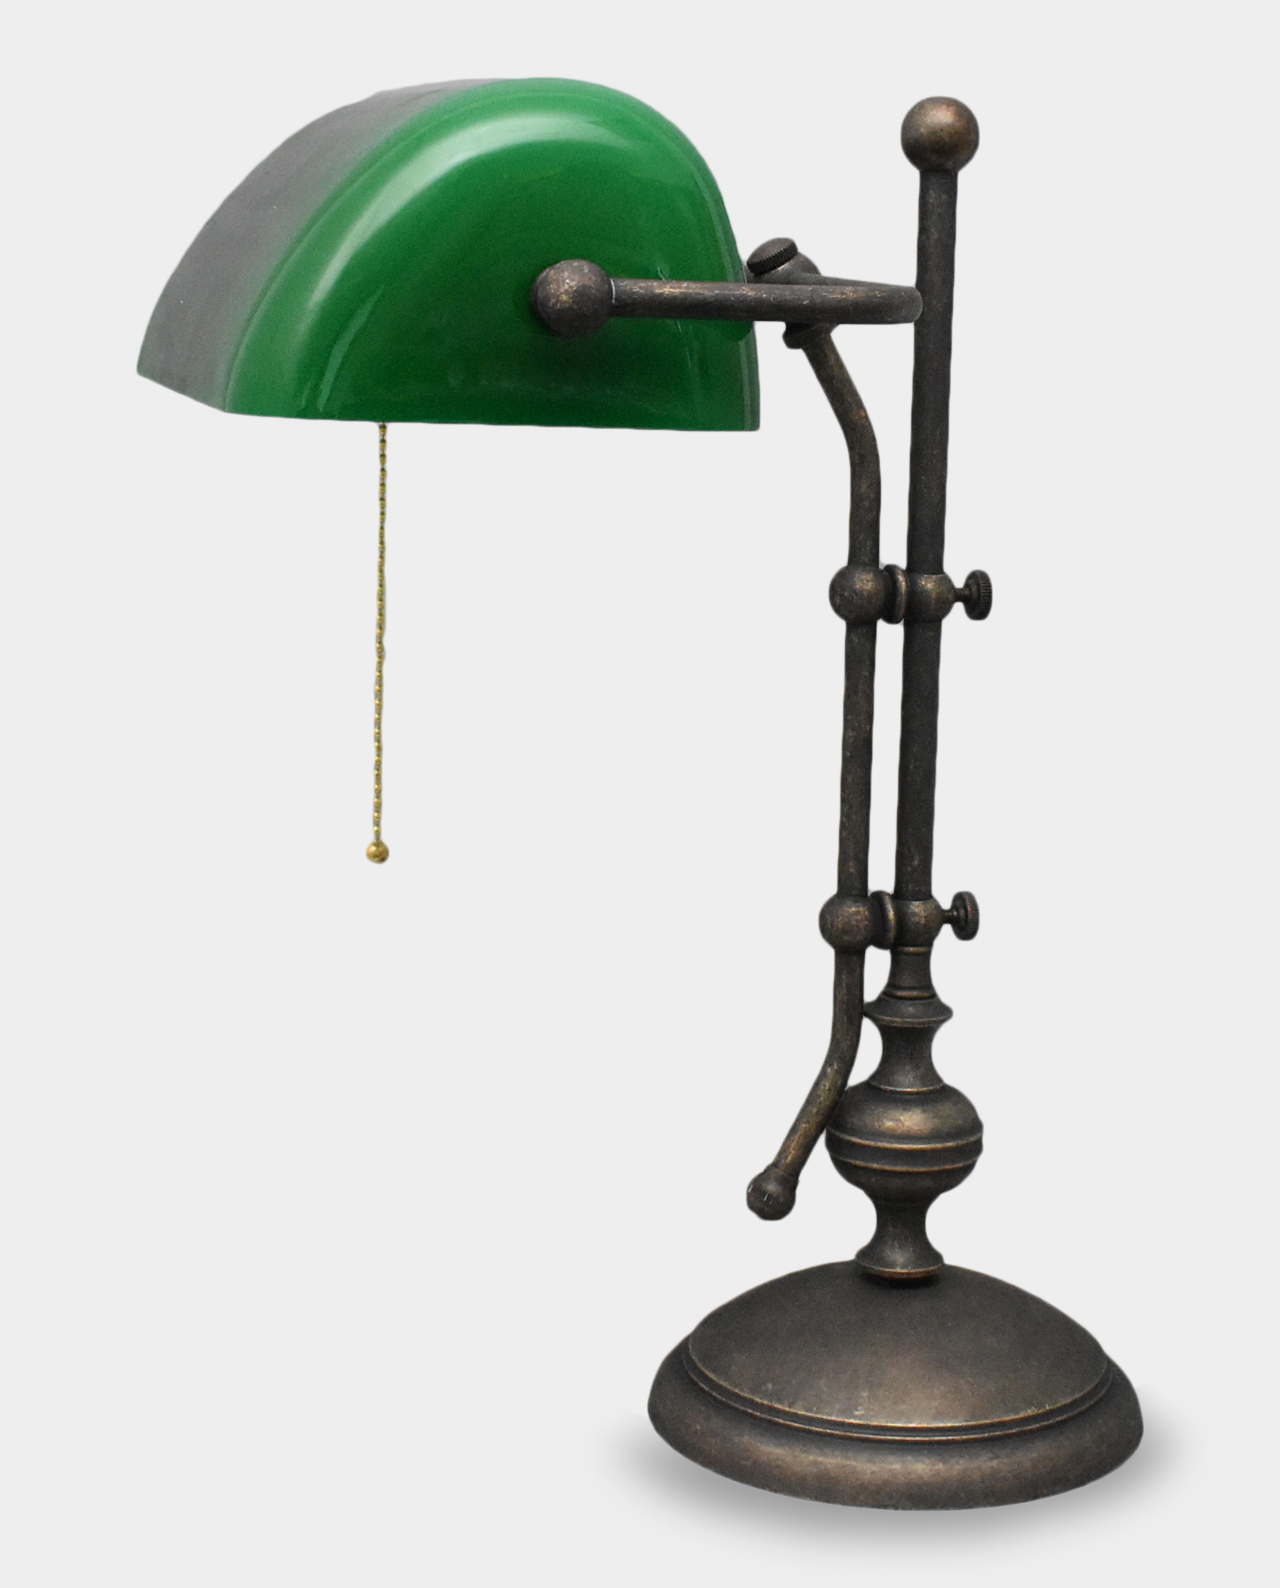 Cabinet Banker Lamp Vintage Look Green Glass Shade, Great Decor for Home  and Office Interiors